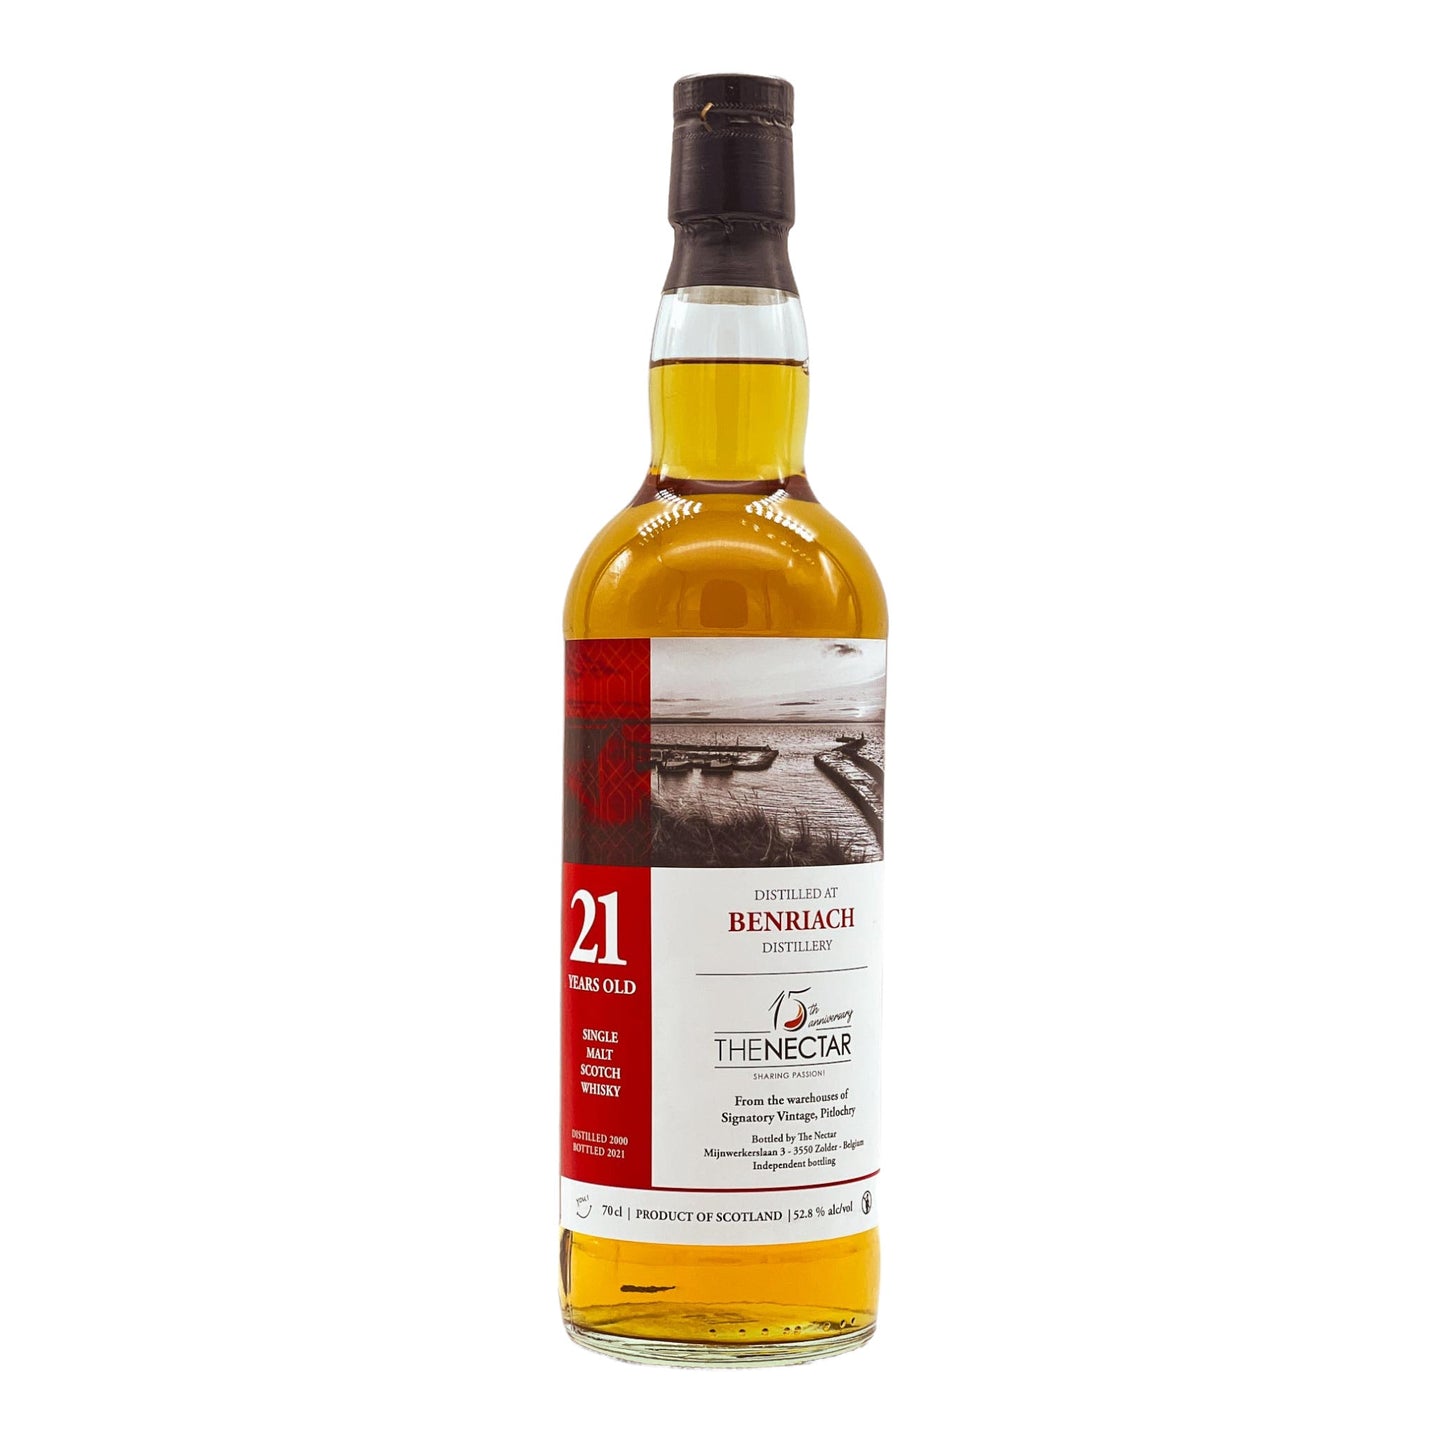 BenRiach | 21 Jahre | 2000/2021 | 15 years of The Nectar | The Nectar of the Daily Drams | 0,7l | 52,8%GET A BOTTLE